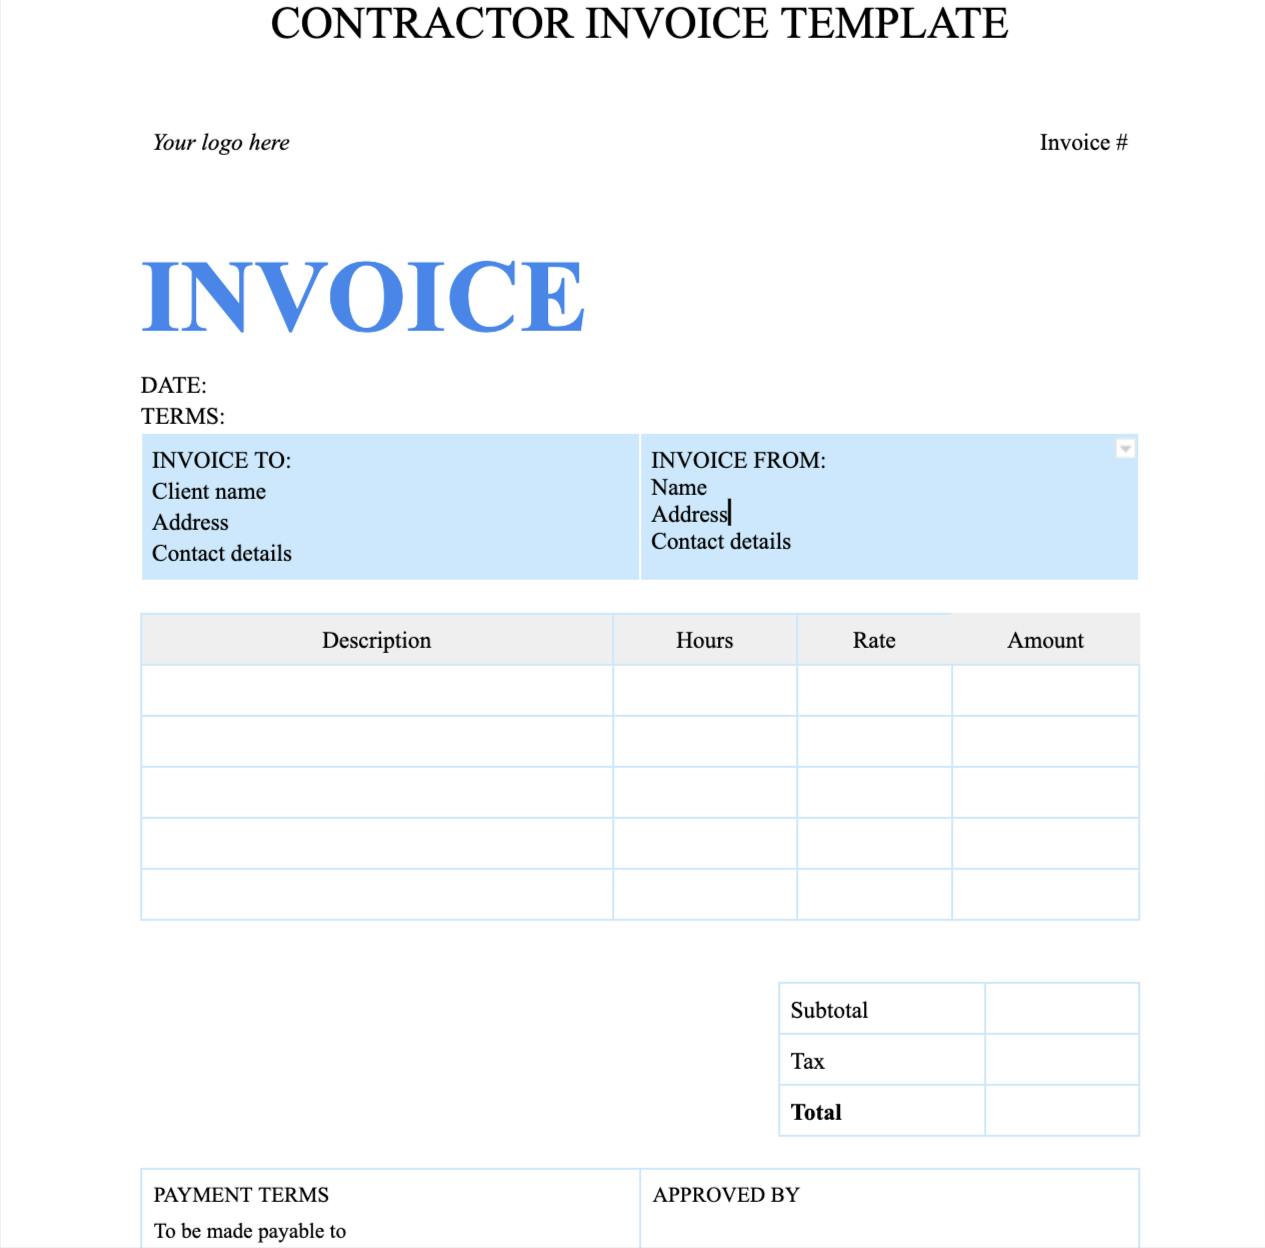 Contractor invoice template in Google docs